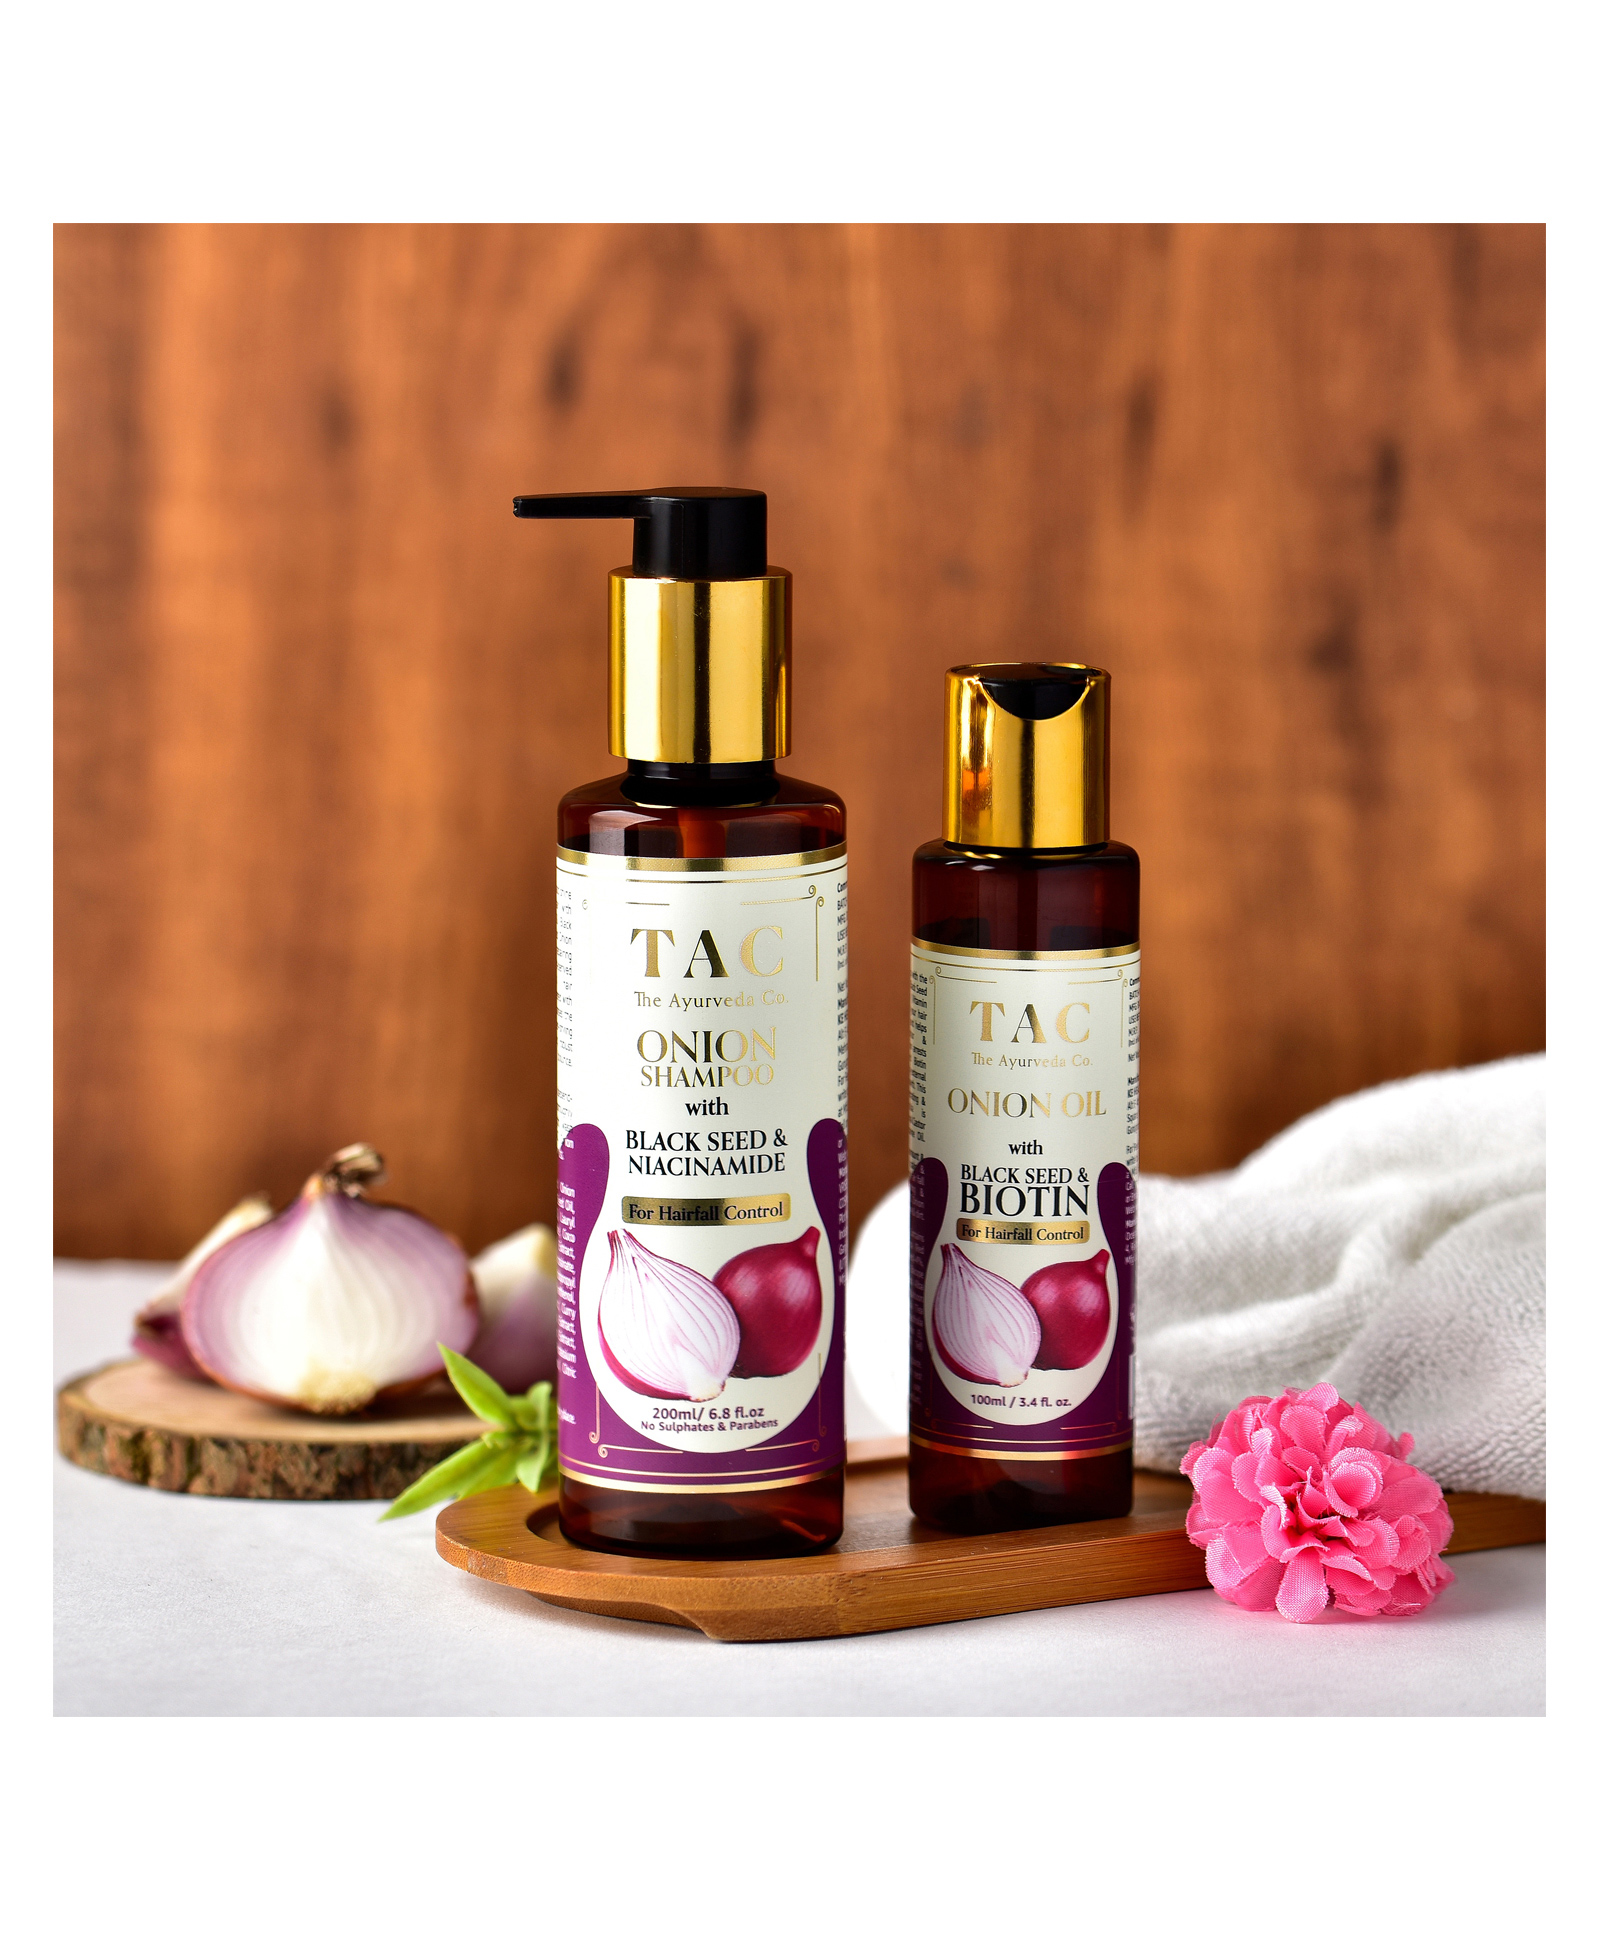 TAC - The Ayurveda Co. Combo of Onion Hair Oil. BEST ANTI HAIR FALL OIL BRANDS IN INDIA.